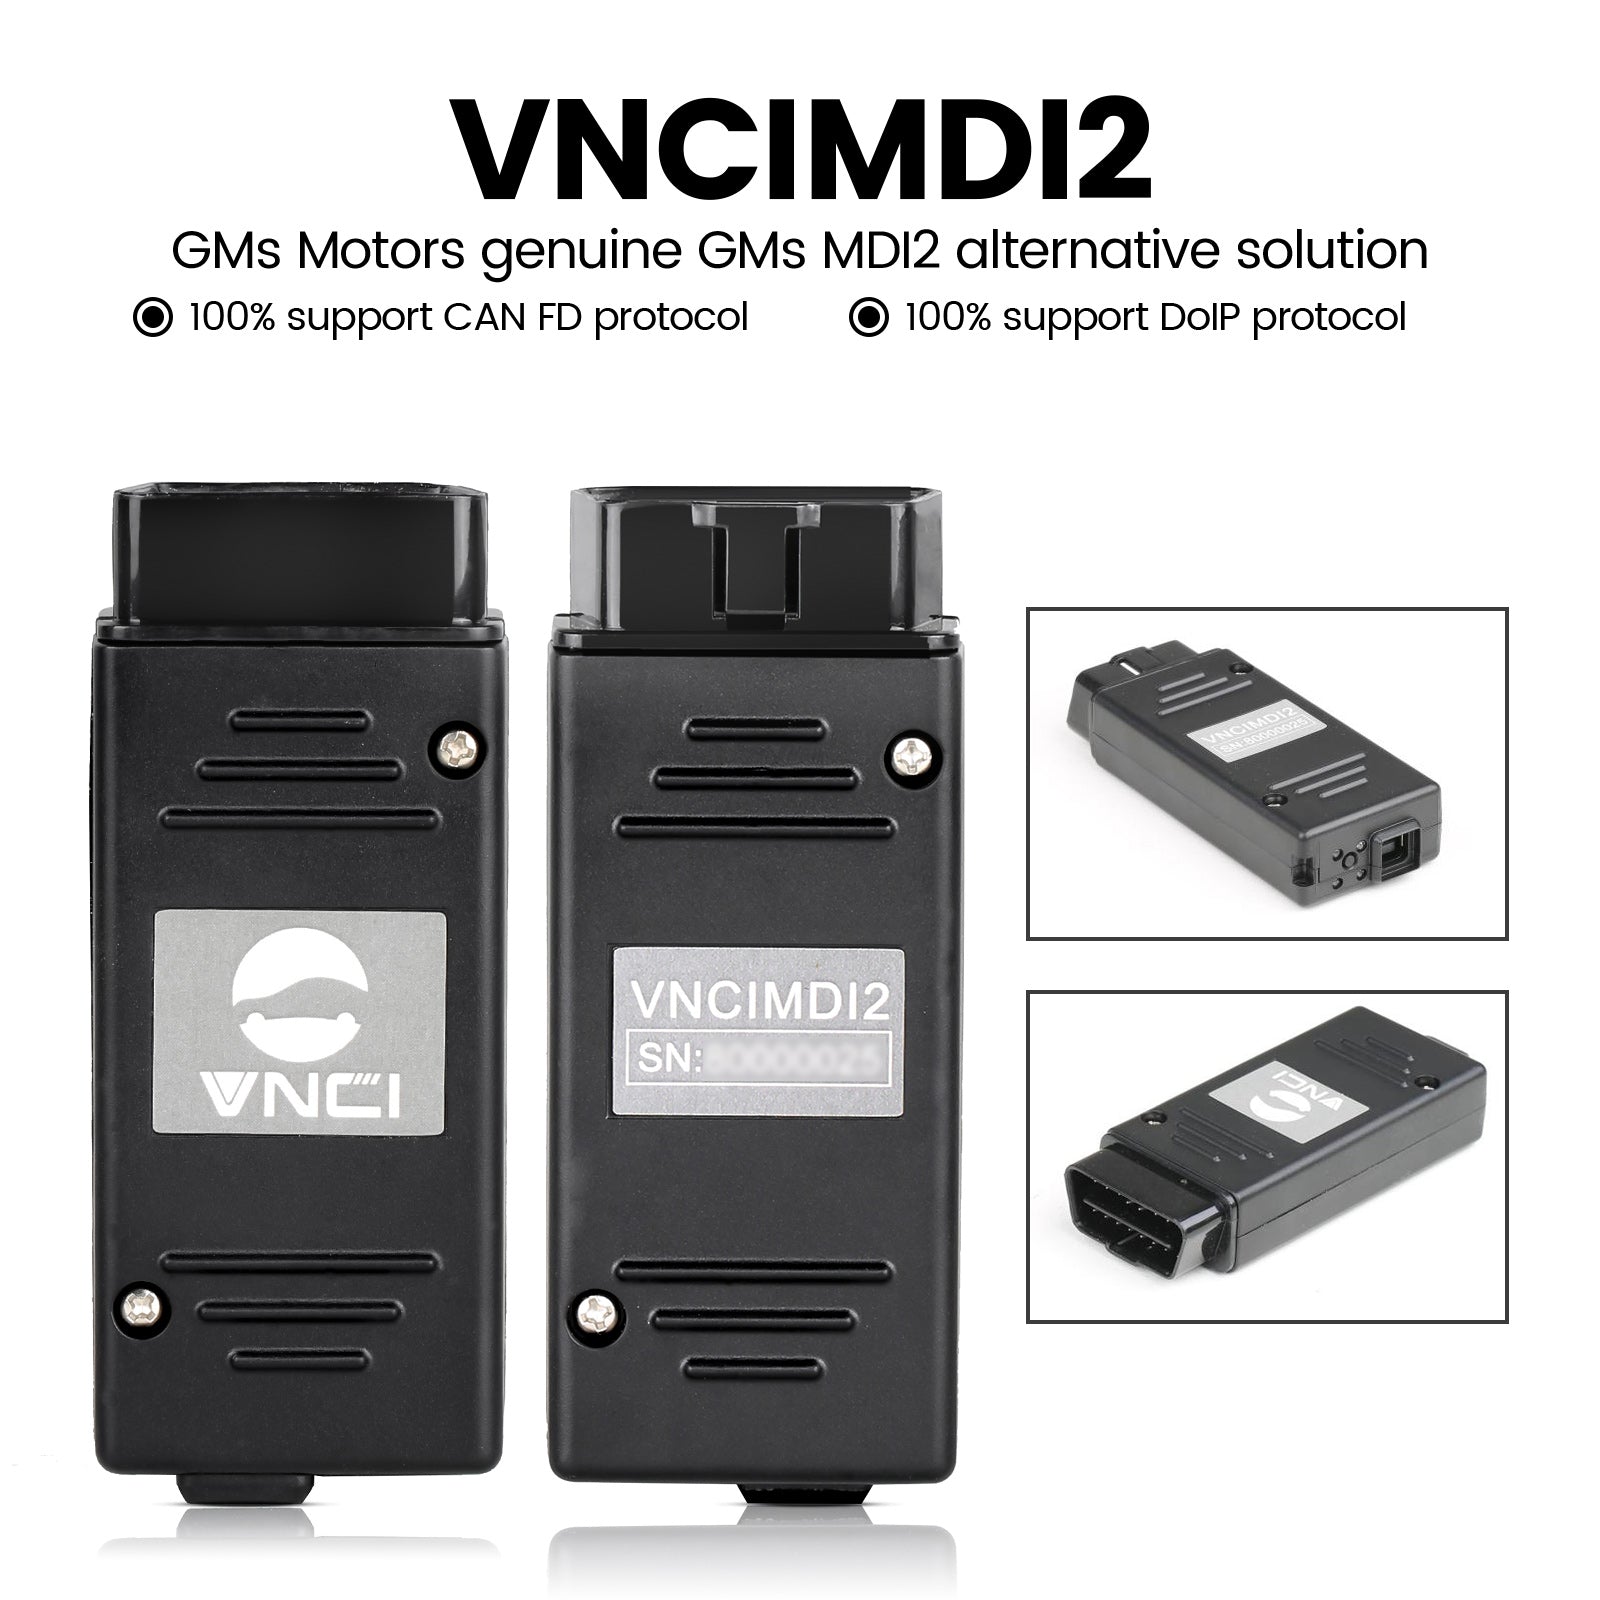 VNCI MDI2 Diagnostic Interface for G-M Support CAN FD/ DoIP